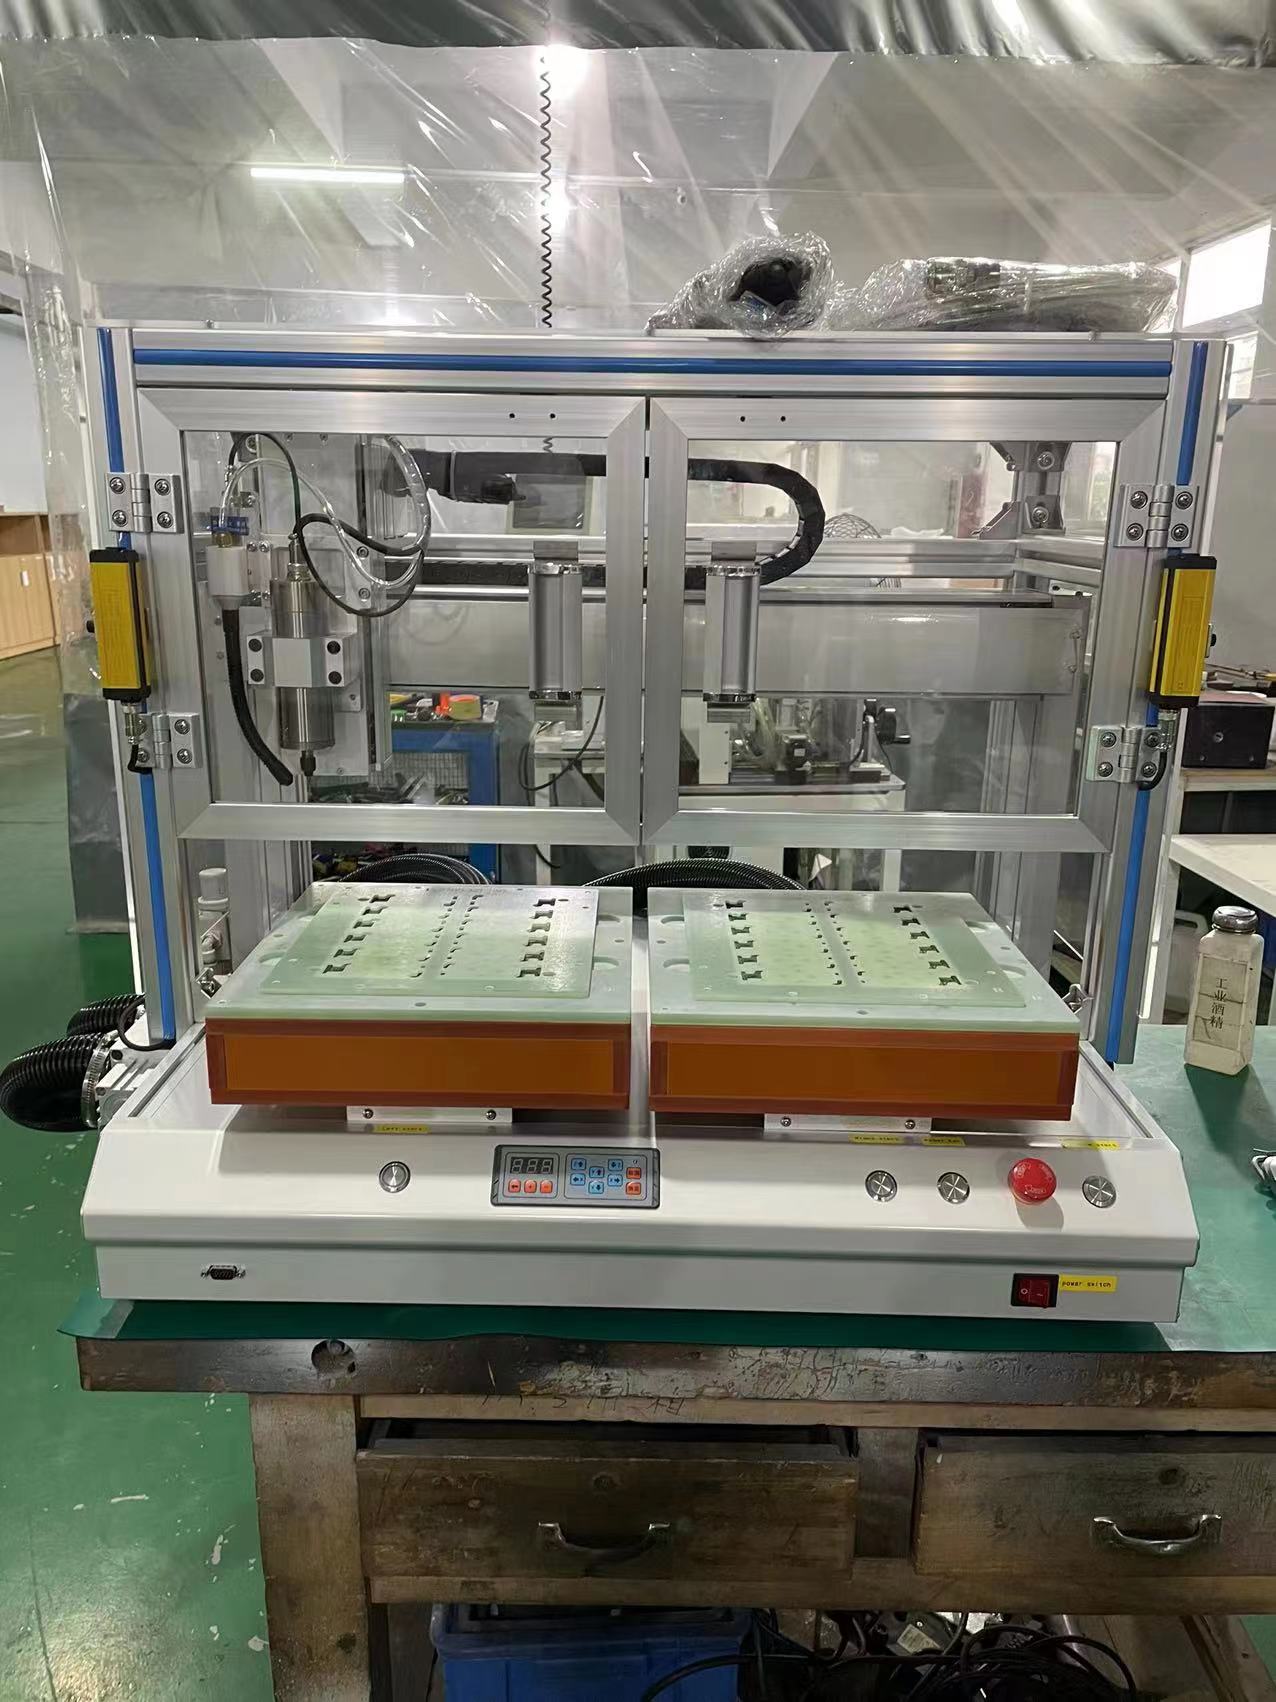 Auto Dust Cleaner Benchtop PCB Depanel PCB Routing Machine With Robust Frame.jpg